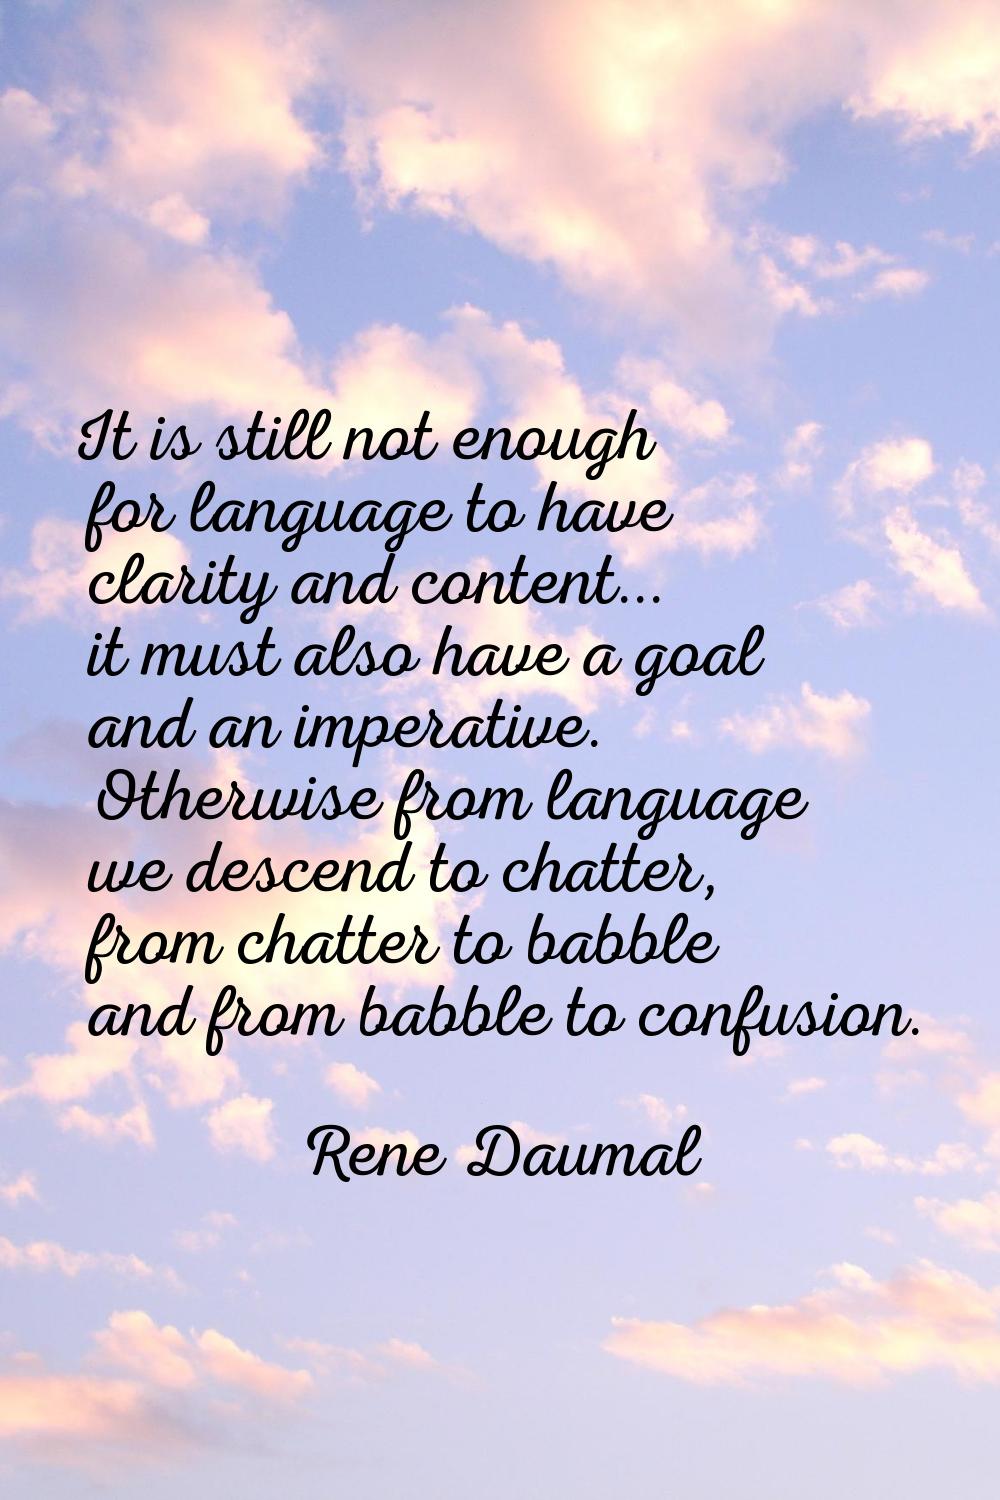 It is still not enough for language to have clarity and content... it must also have a goal and an 